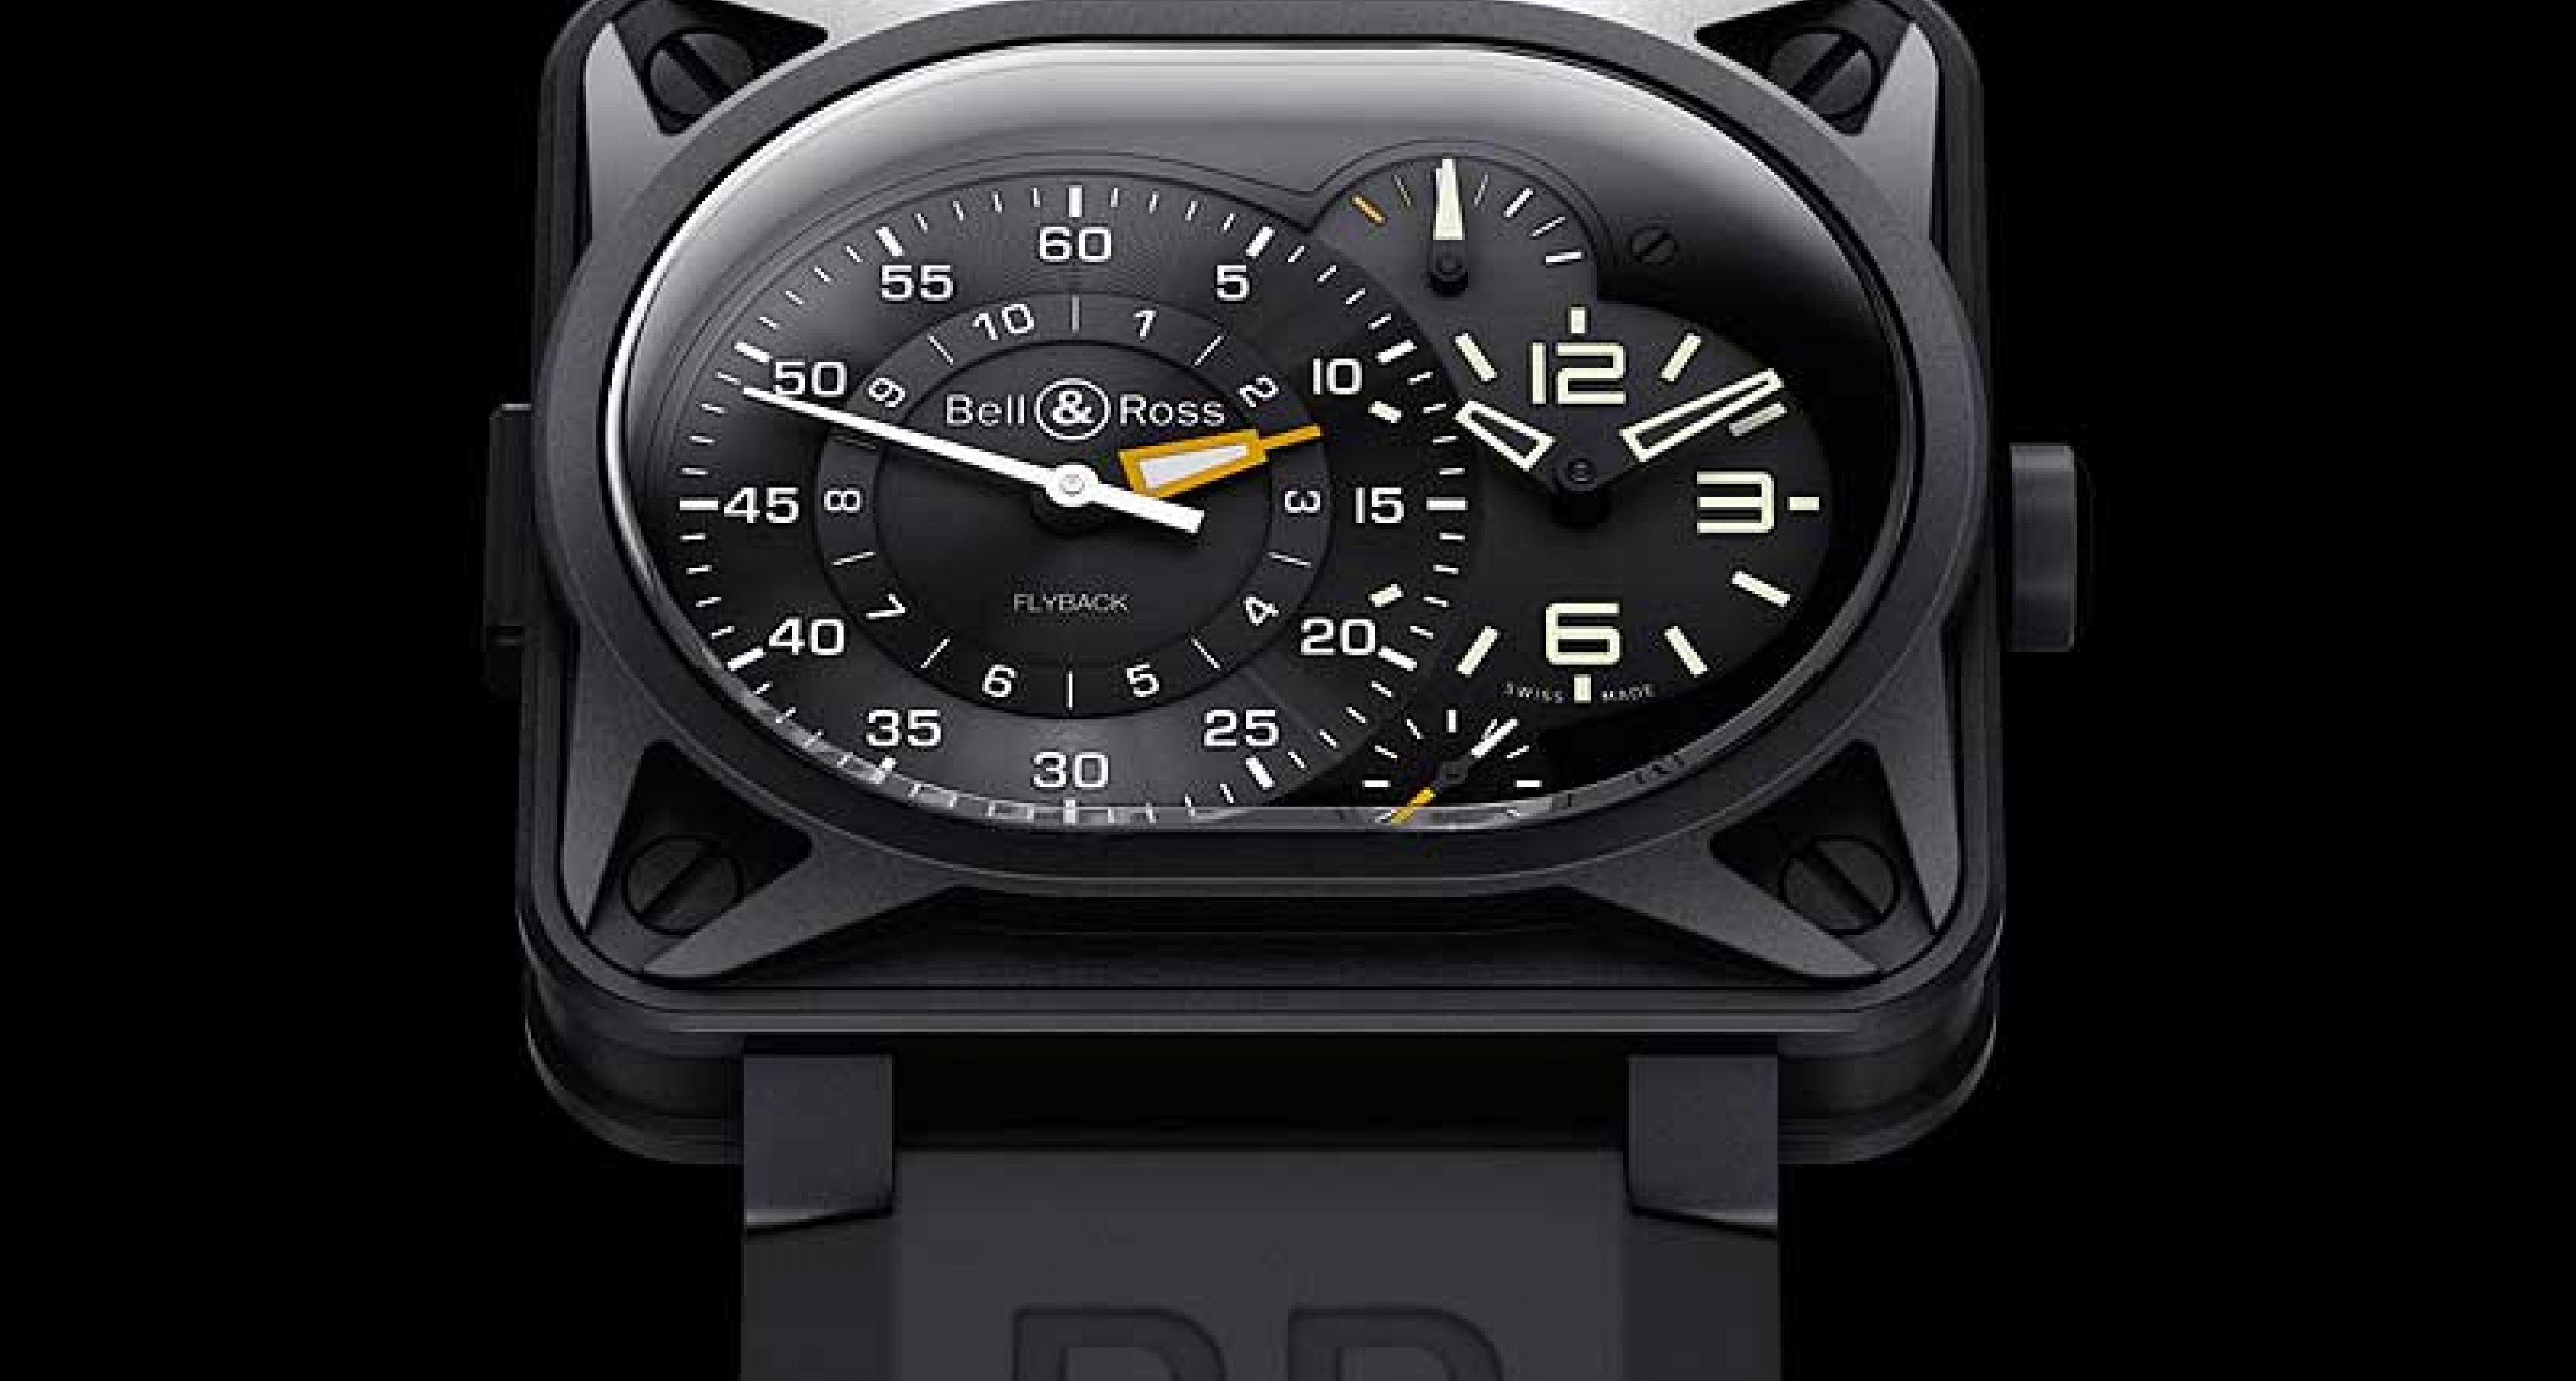 Bell & Ross: New Models to Debut at Baselworld